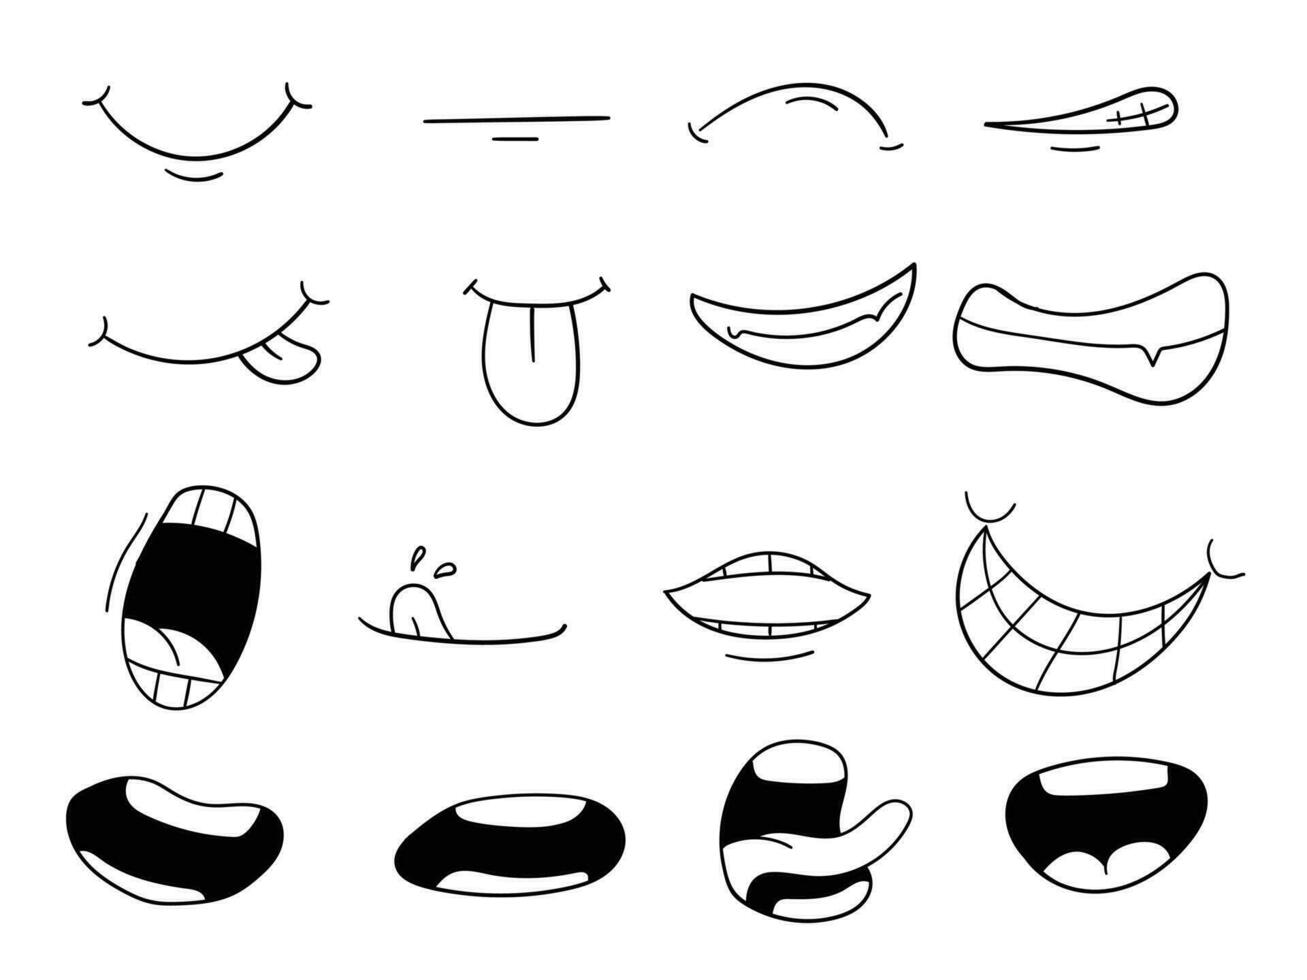 Cartoon mouth smile, happy, sad expression set. Hand drawn doodle mouth vector